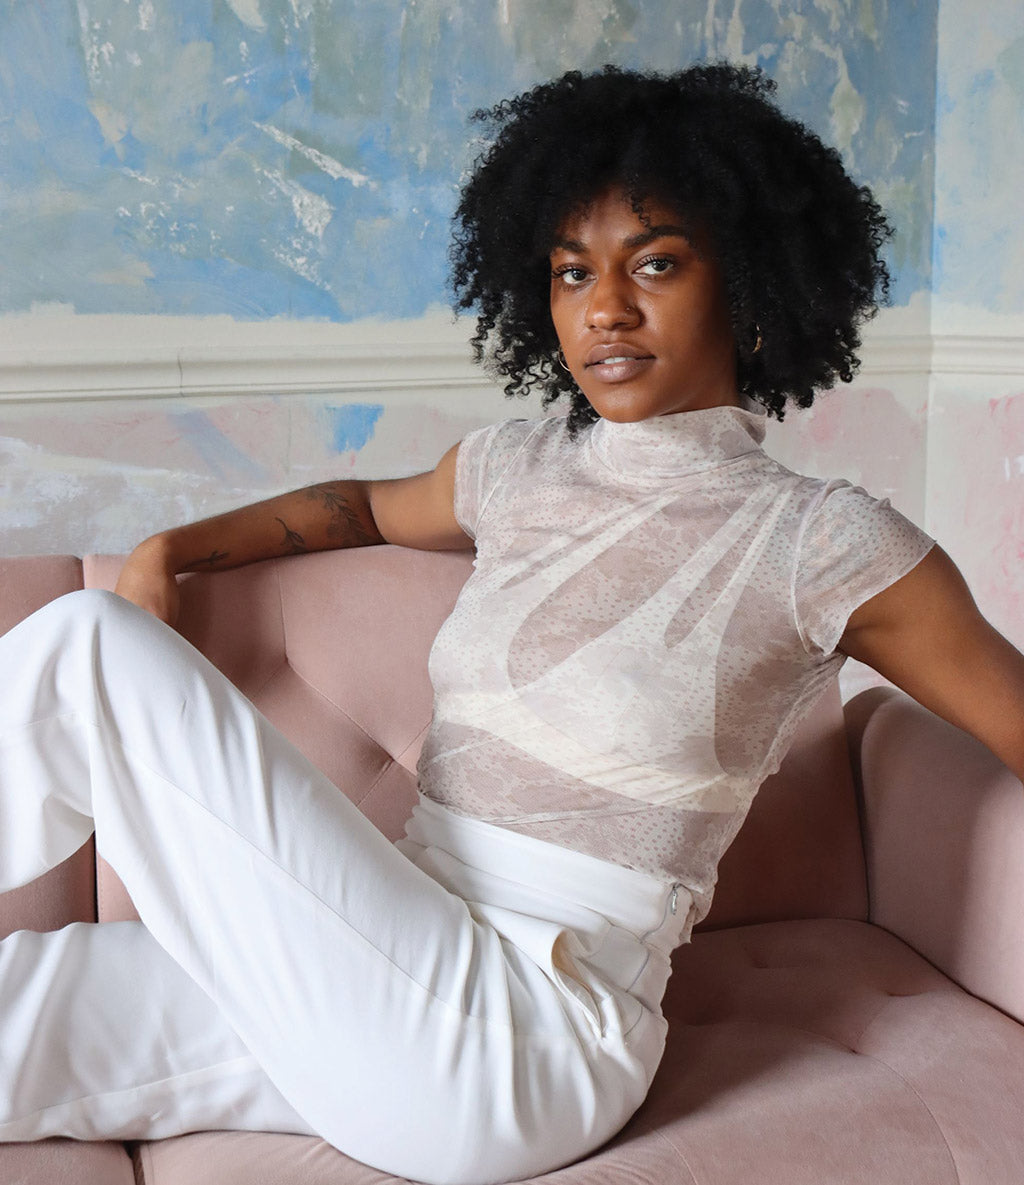 Woman sitting on the couch wearing the Nuudii Tee System in Creme wearing clothing